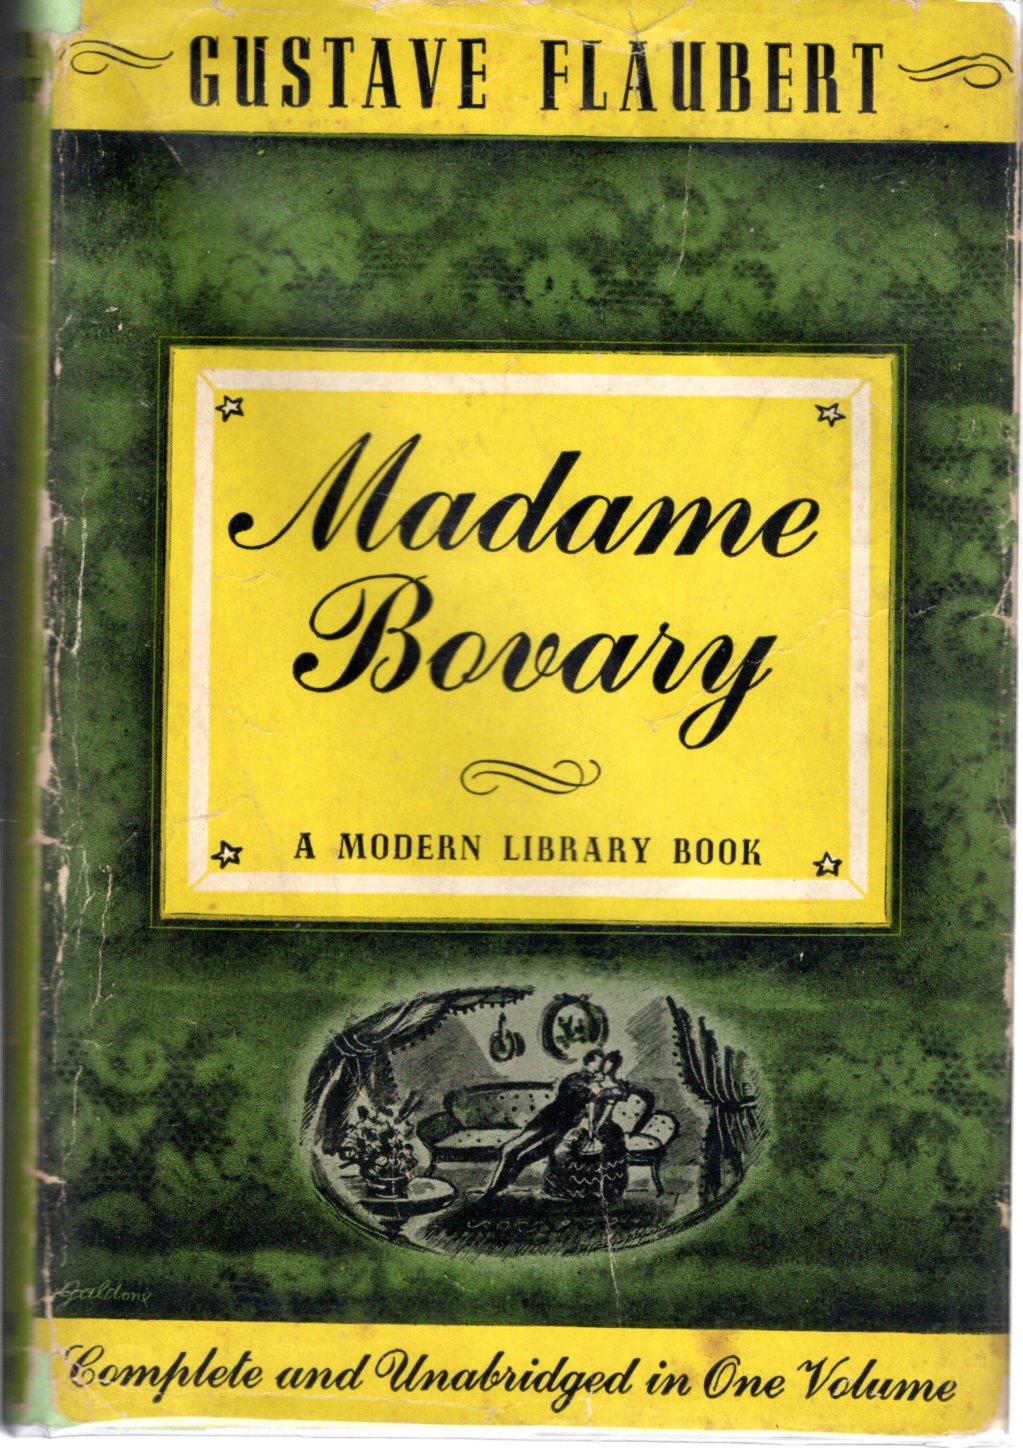 Madame Bovary: Provincial Manners - Flaubert, Gustave) Aveling, Eleanor Marx (trans)